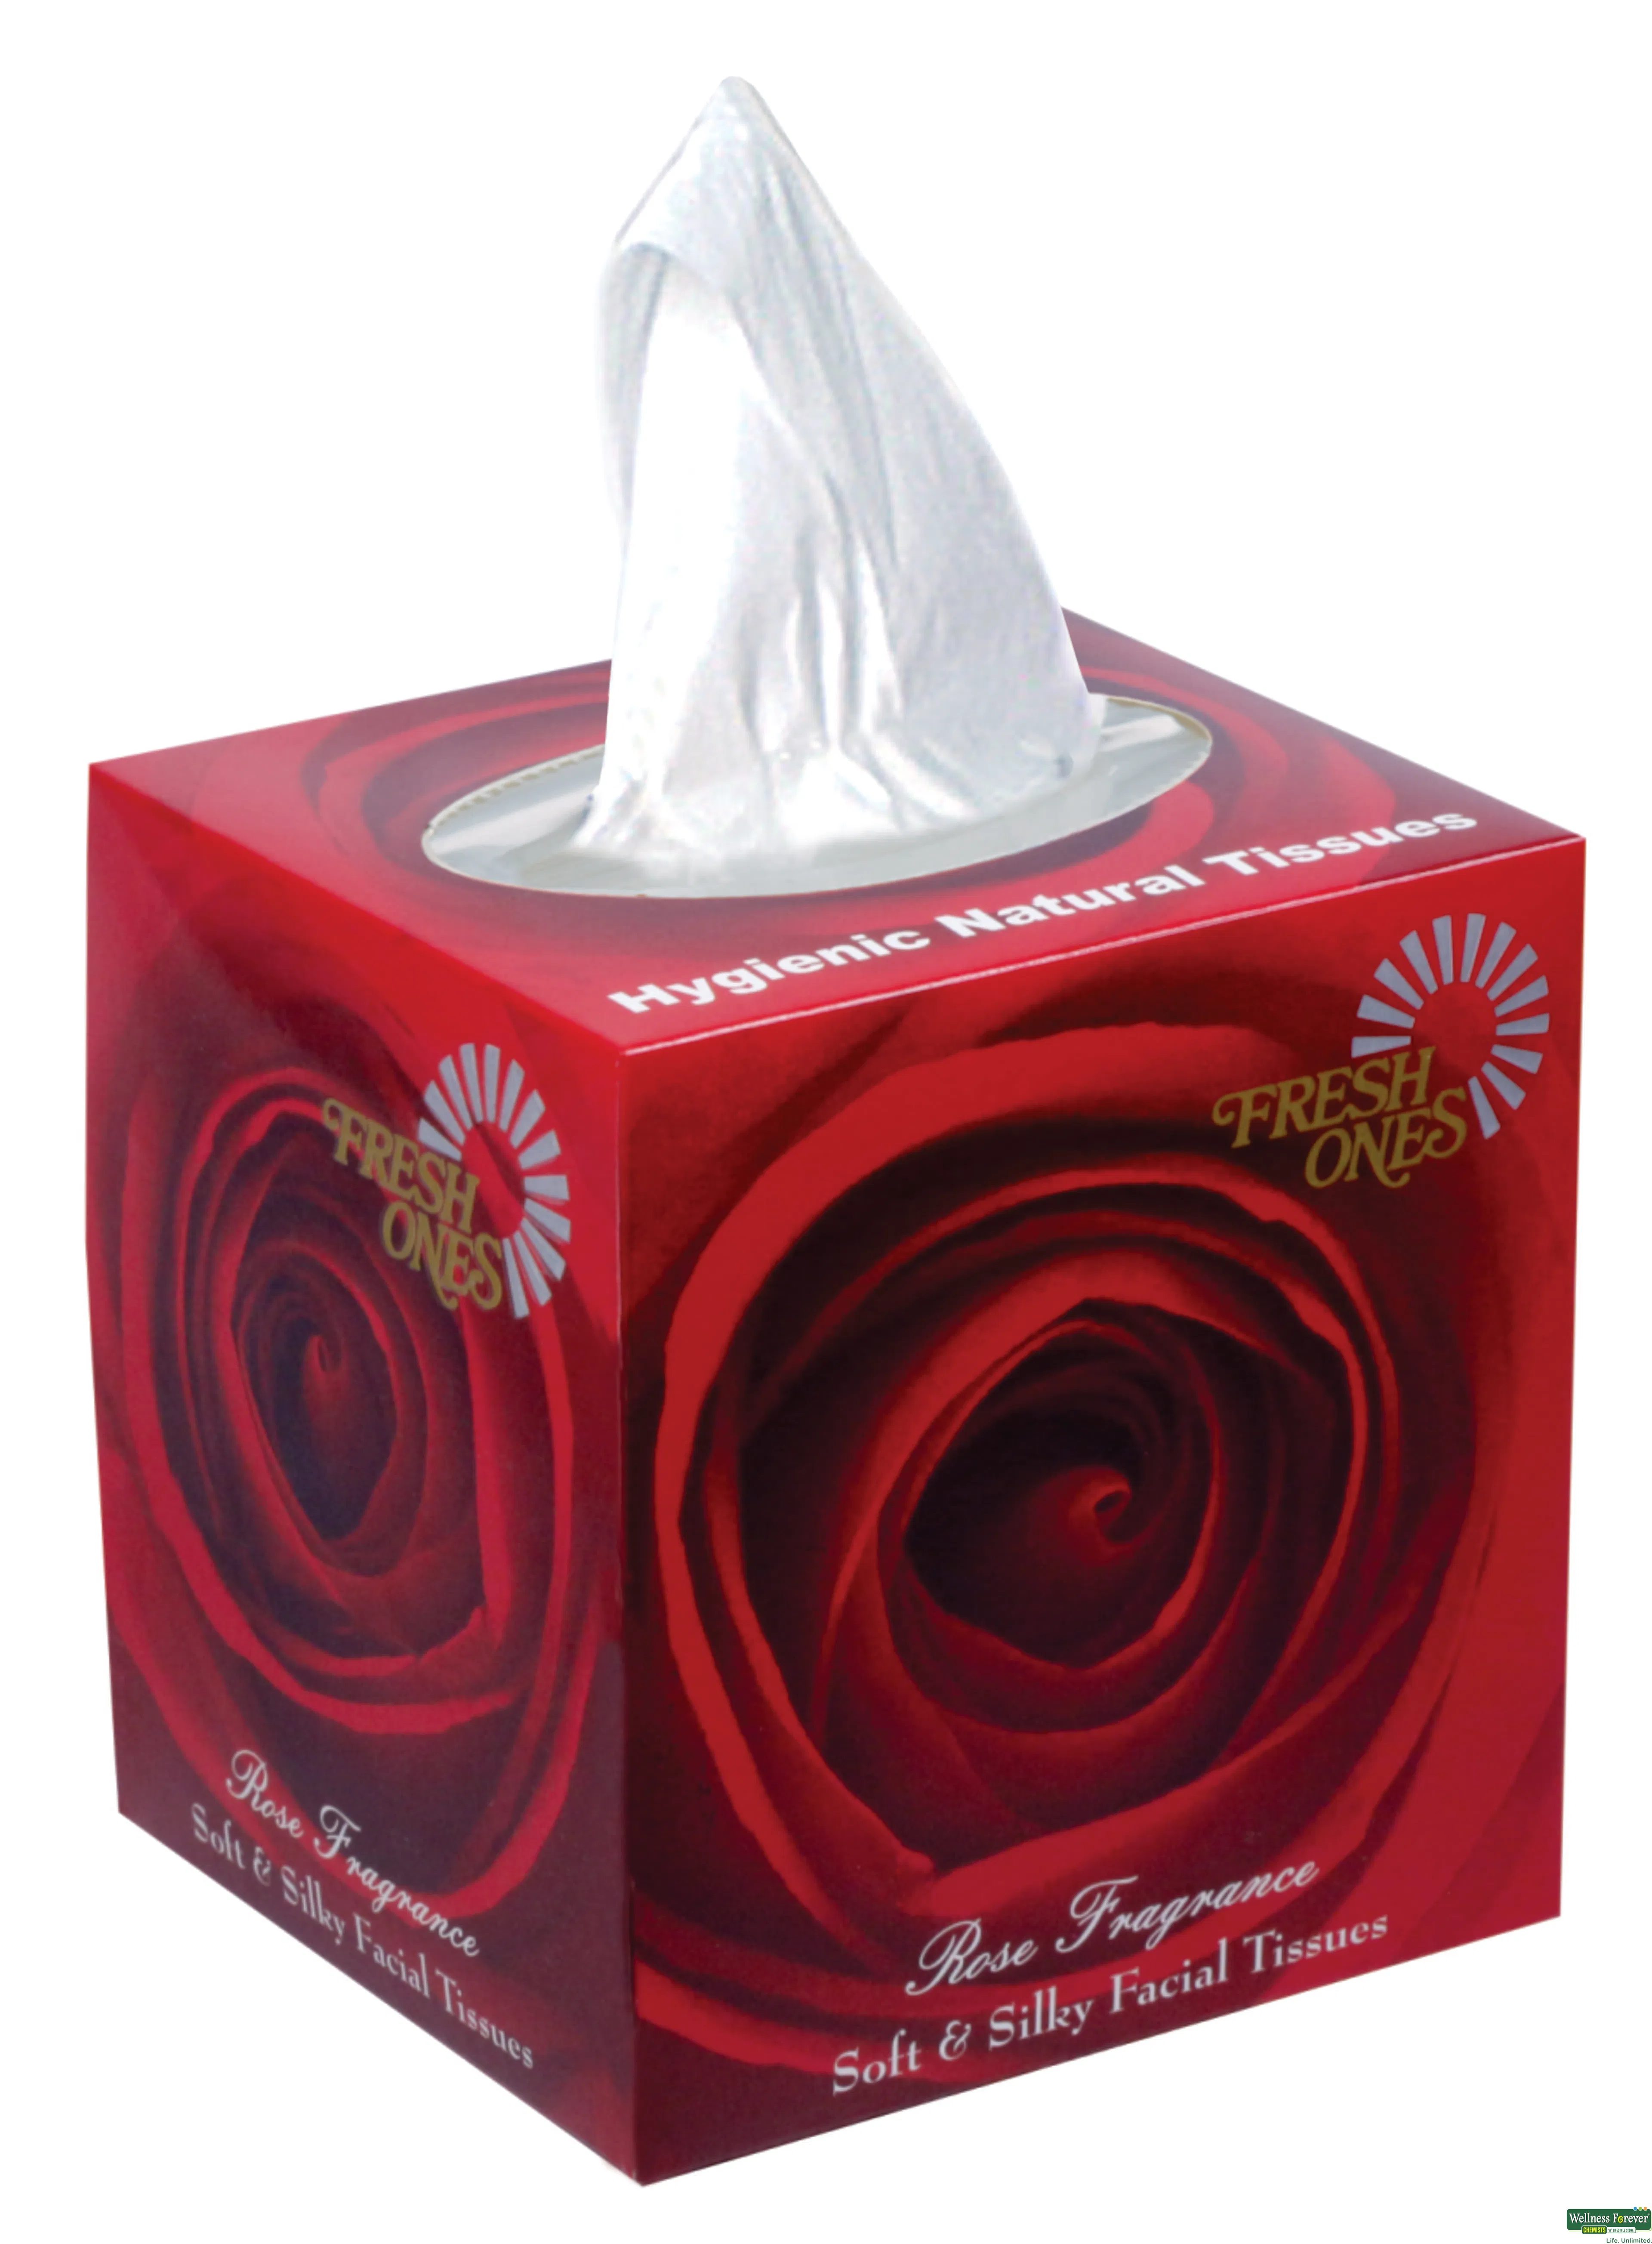 FRESH ONES TISSUE SQUARE ROSE SOFT/SILKY 1PC-image